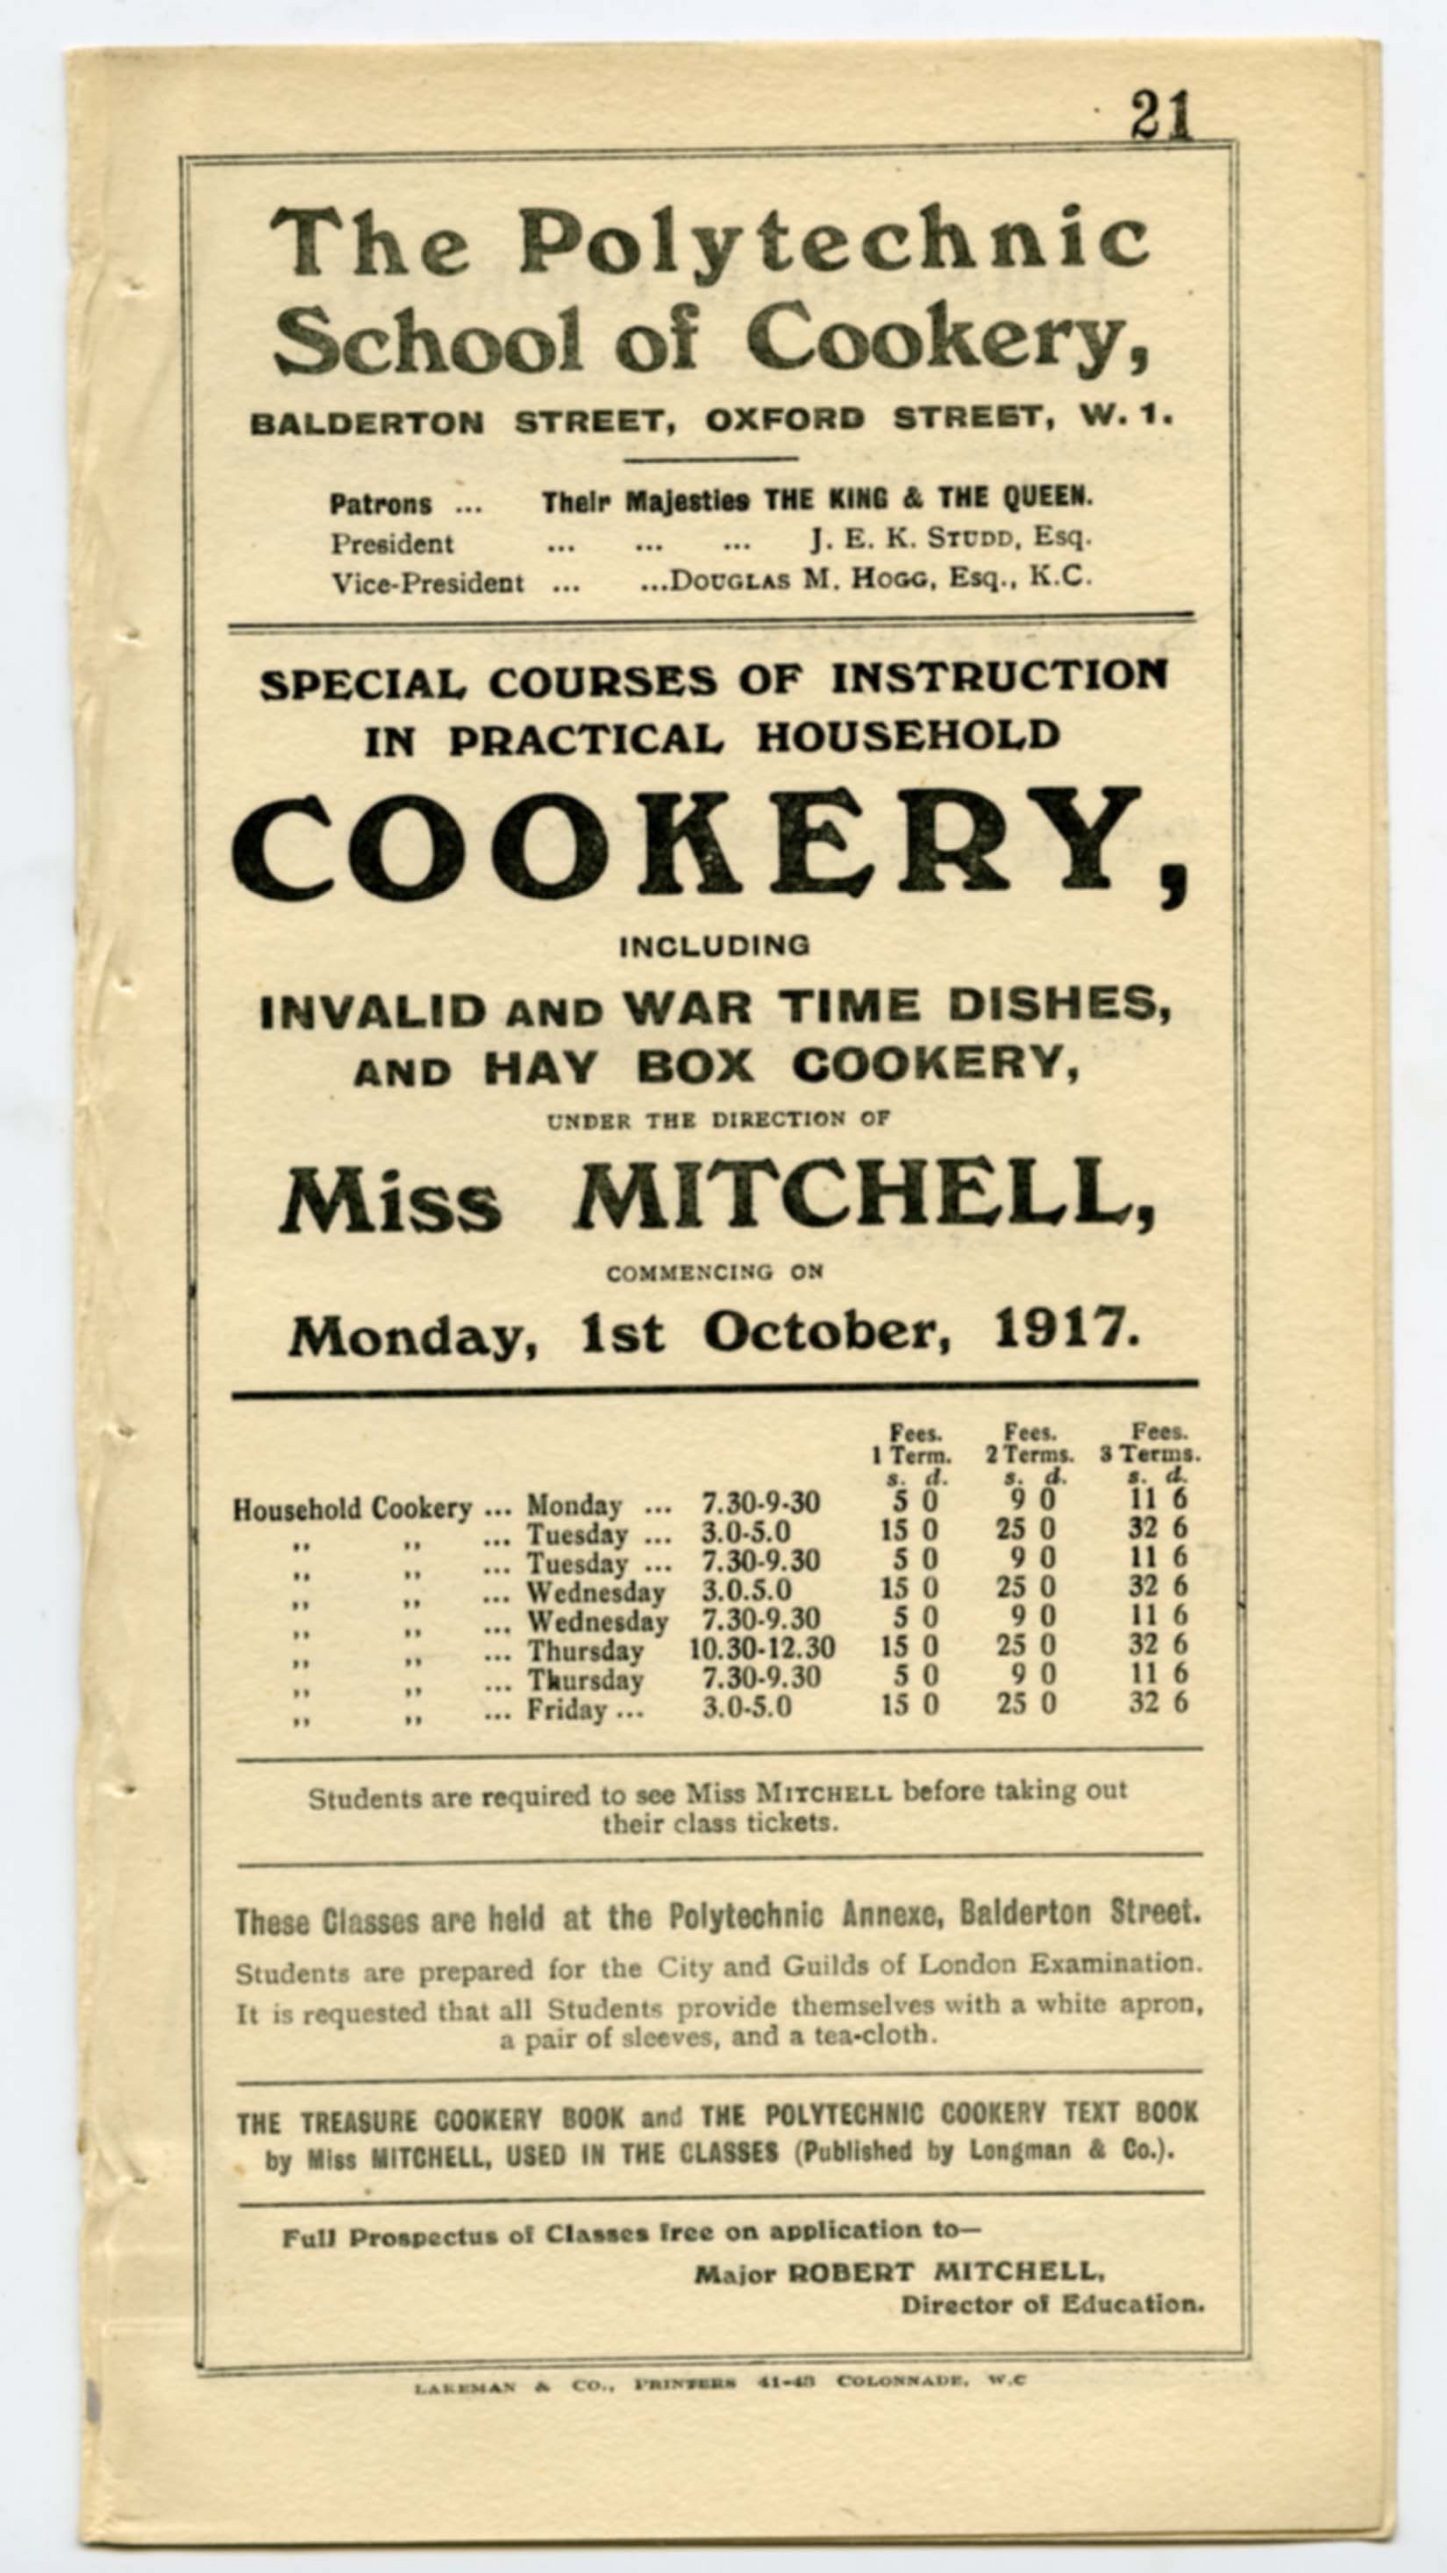 Prospectus for Special Course of Instruction in Practical Household Cookery including Invalid and War Time Dishes, 1917